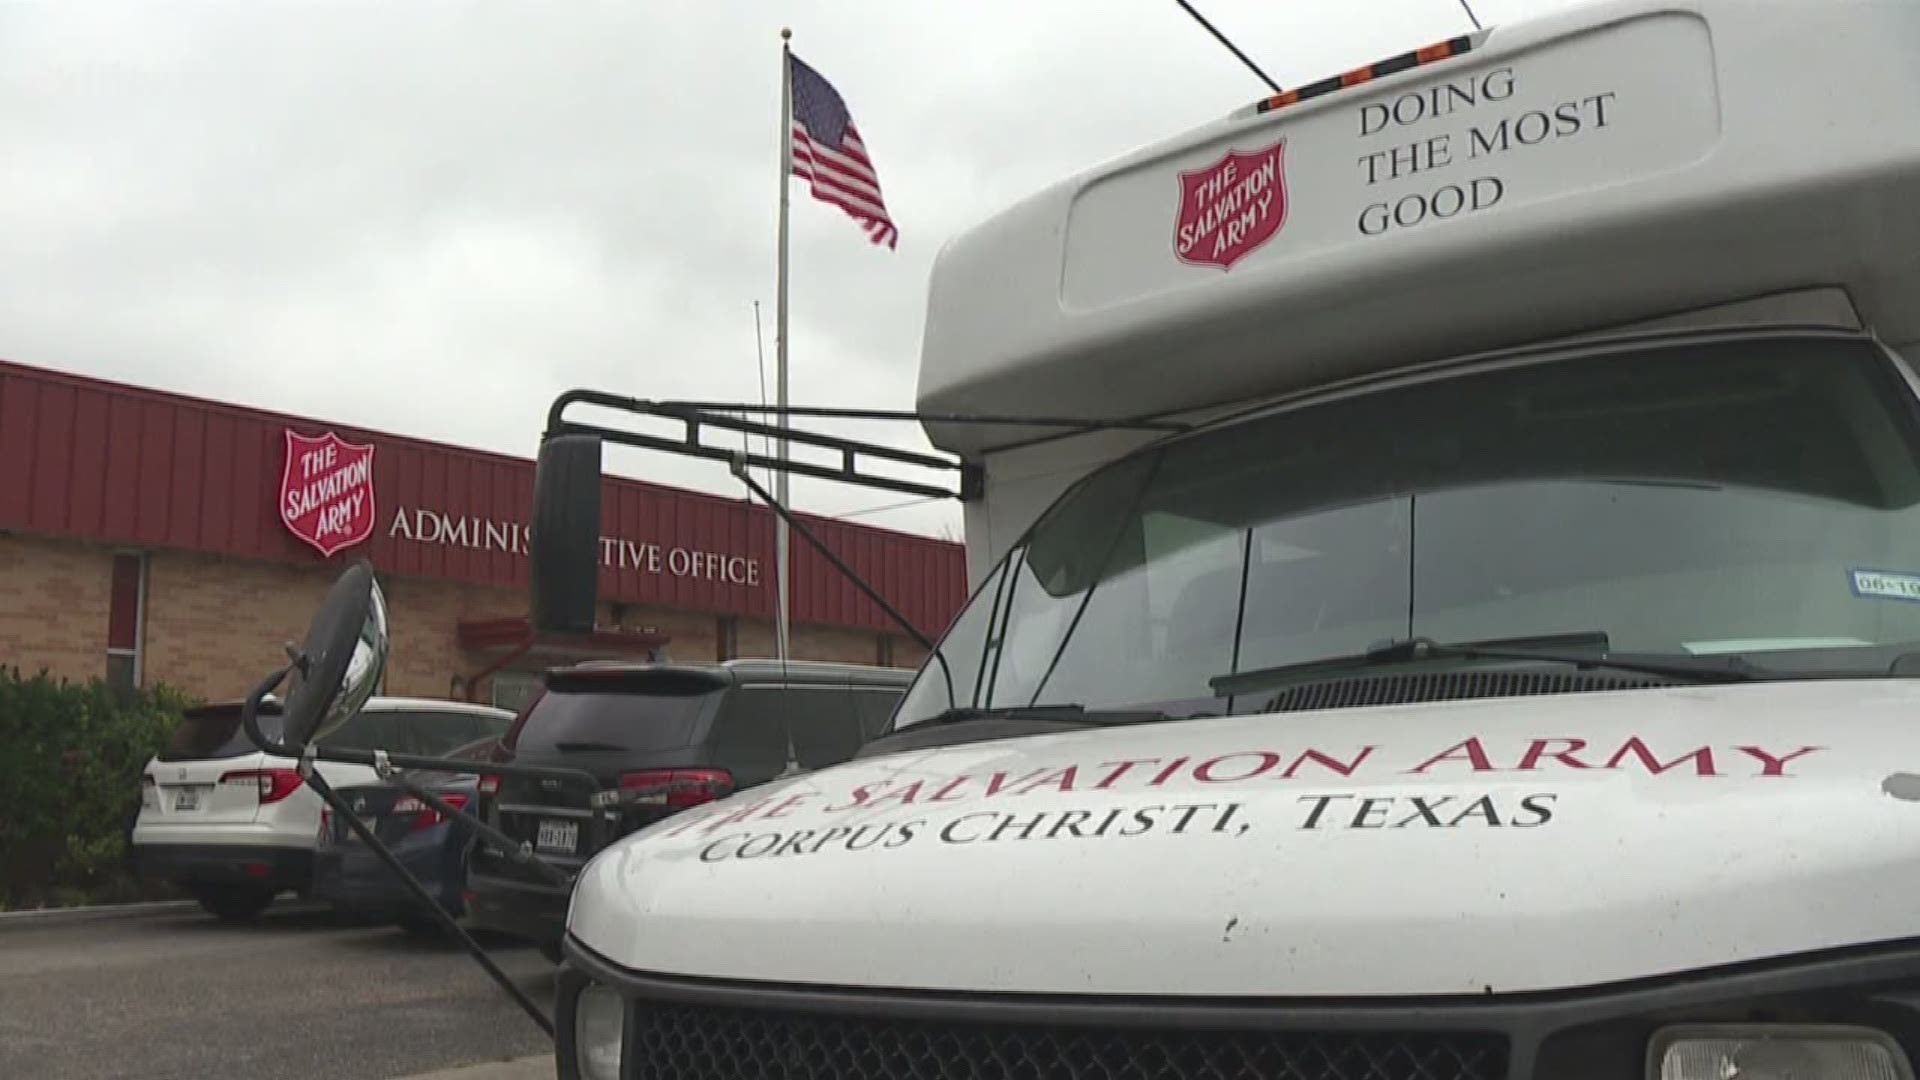 Thanks to generous donations from various organizations in the Coastal Bend, one group will be able to continue their work helping those in need.